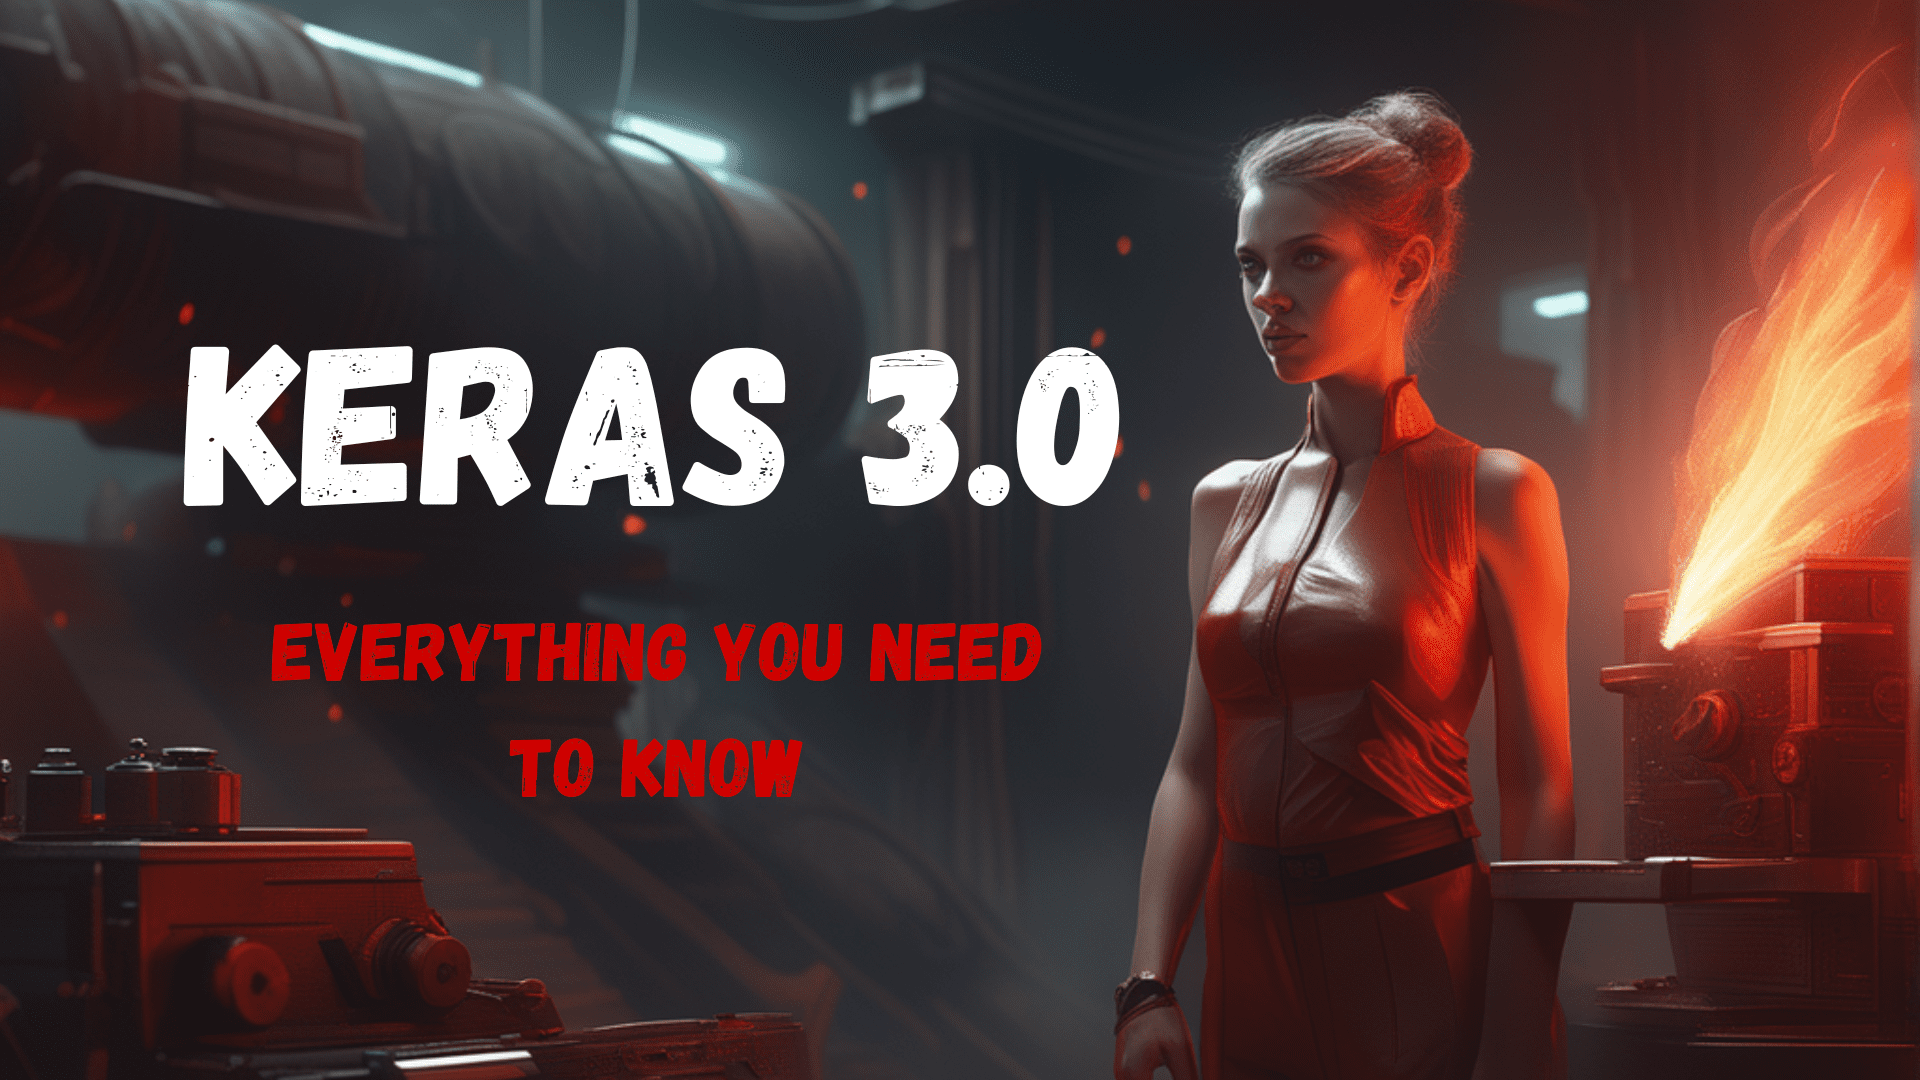 Keras 3.0: Everything You Need To Know